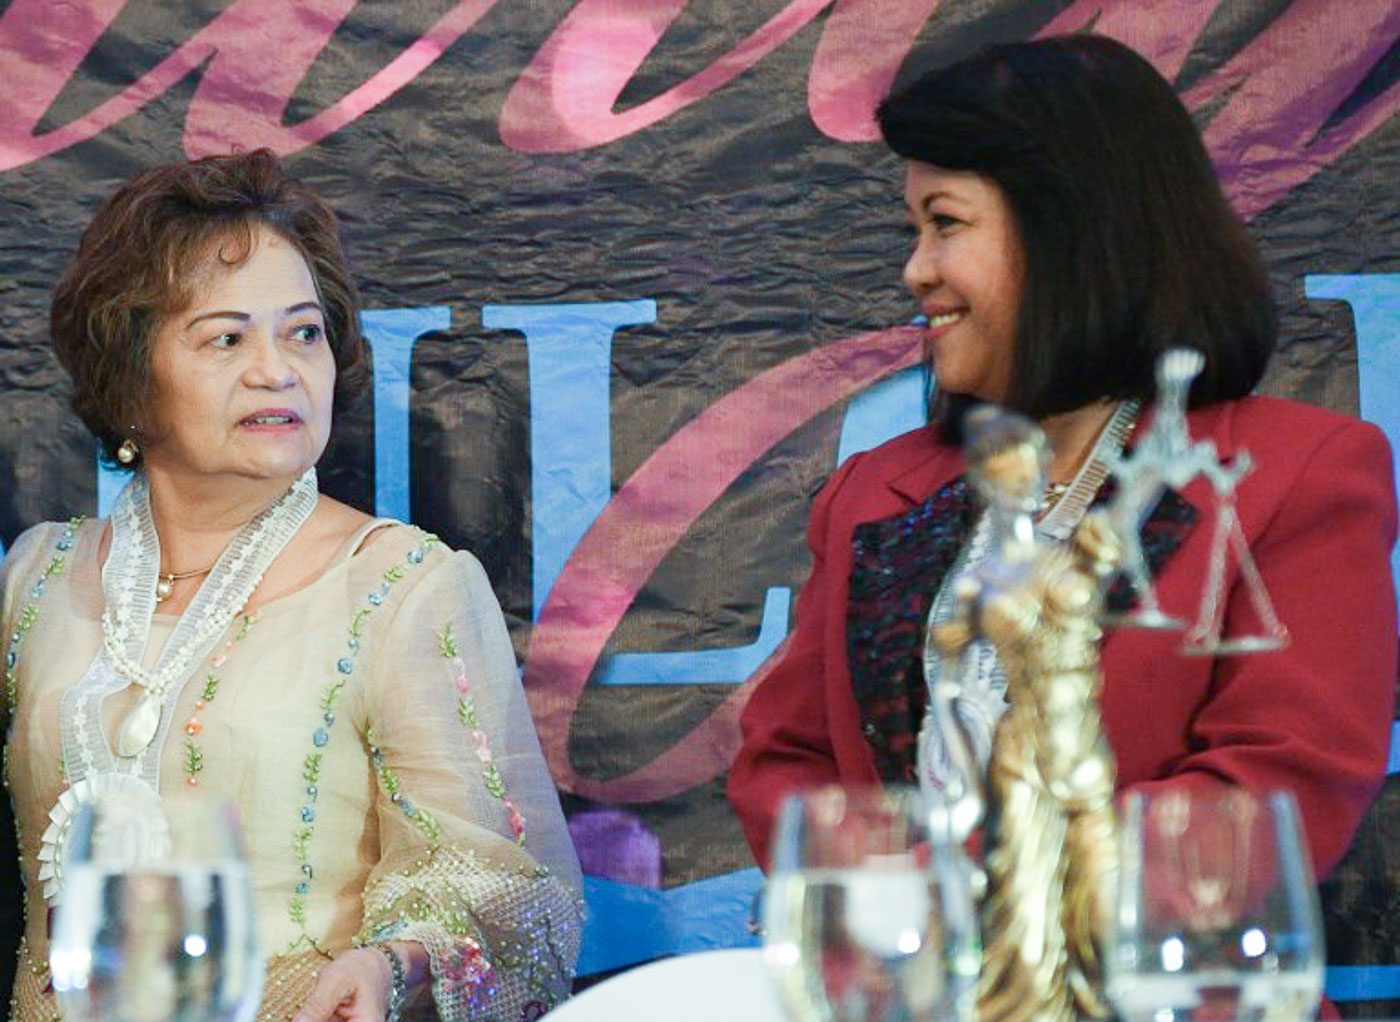 De Castro calls out Sereno as they share one stage